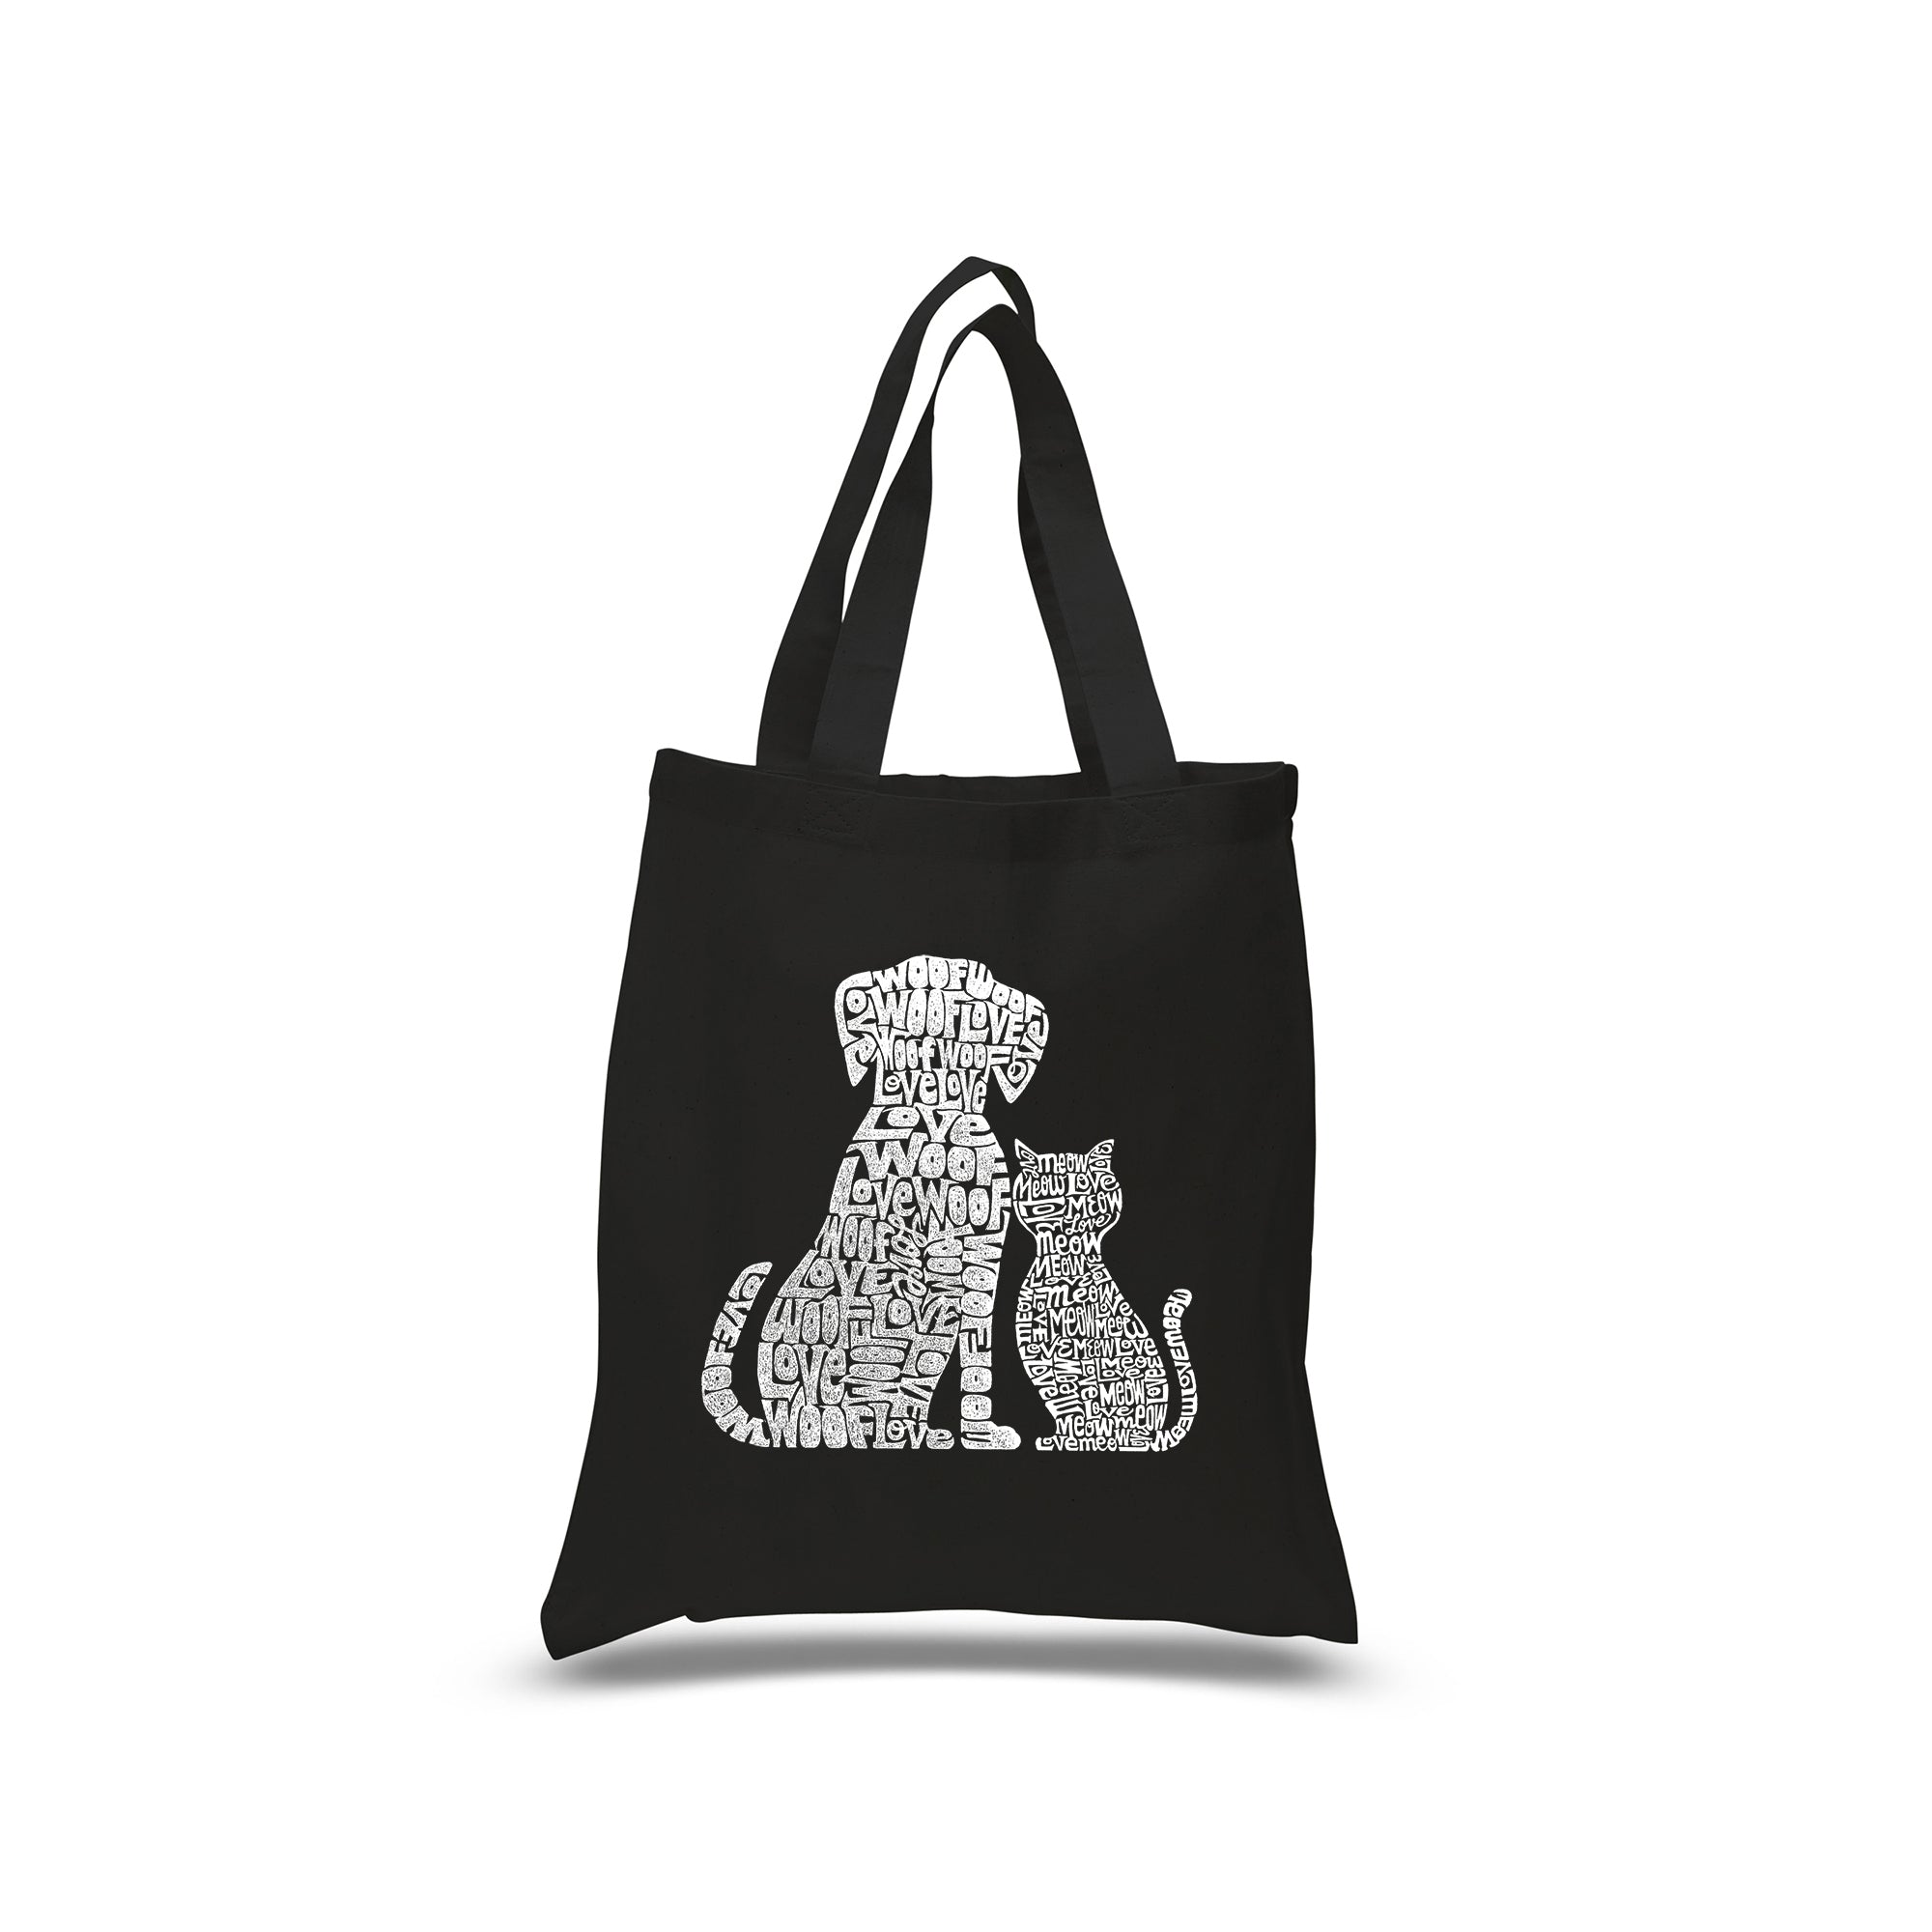 Small Word Art Tote Bag - Dogs And Cats - Black - Small